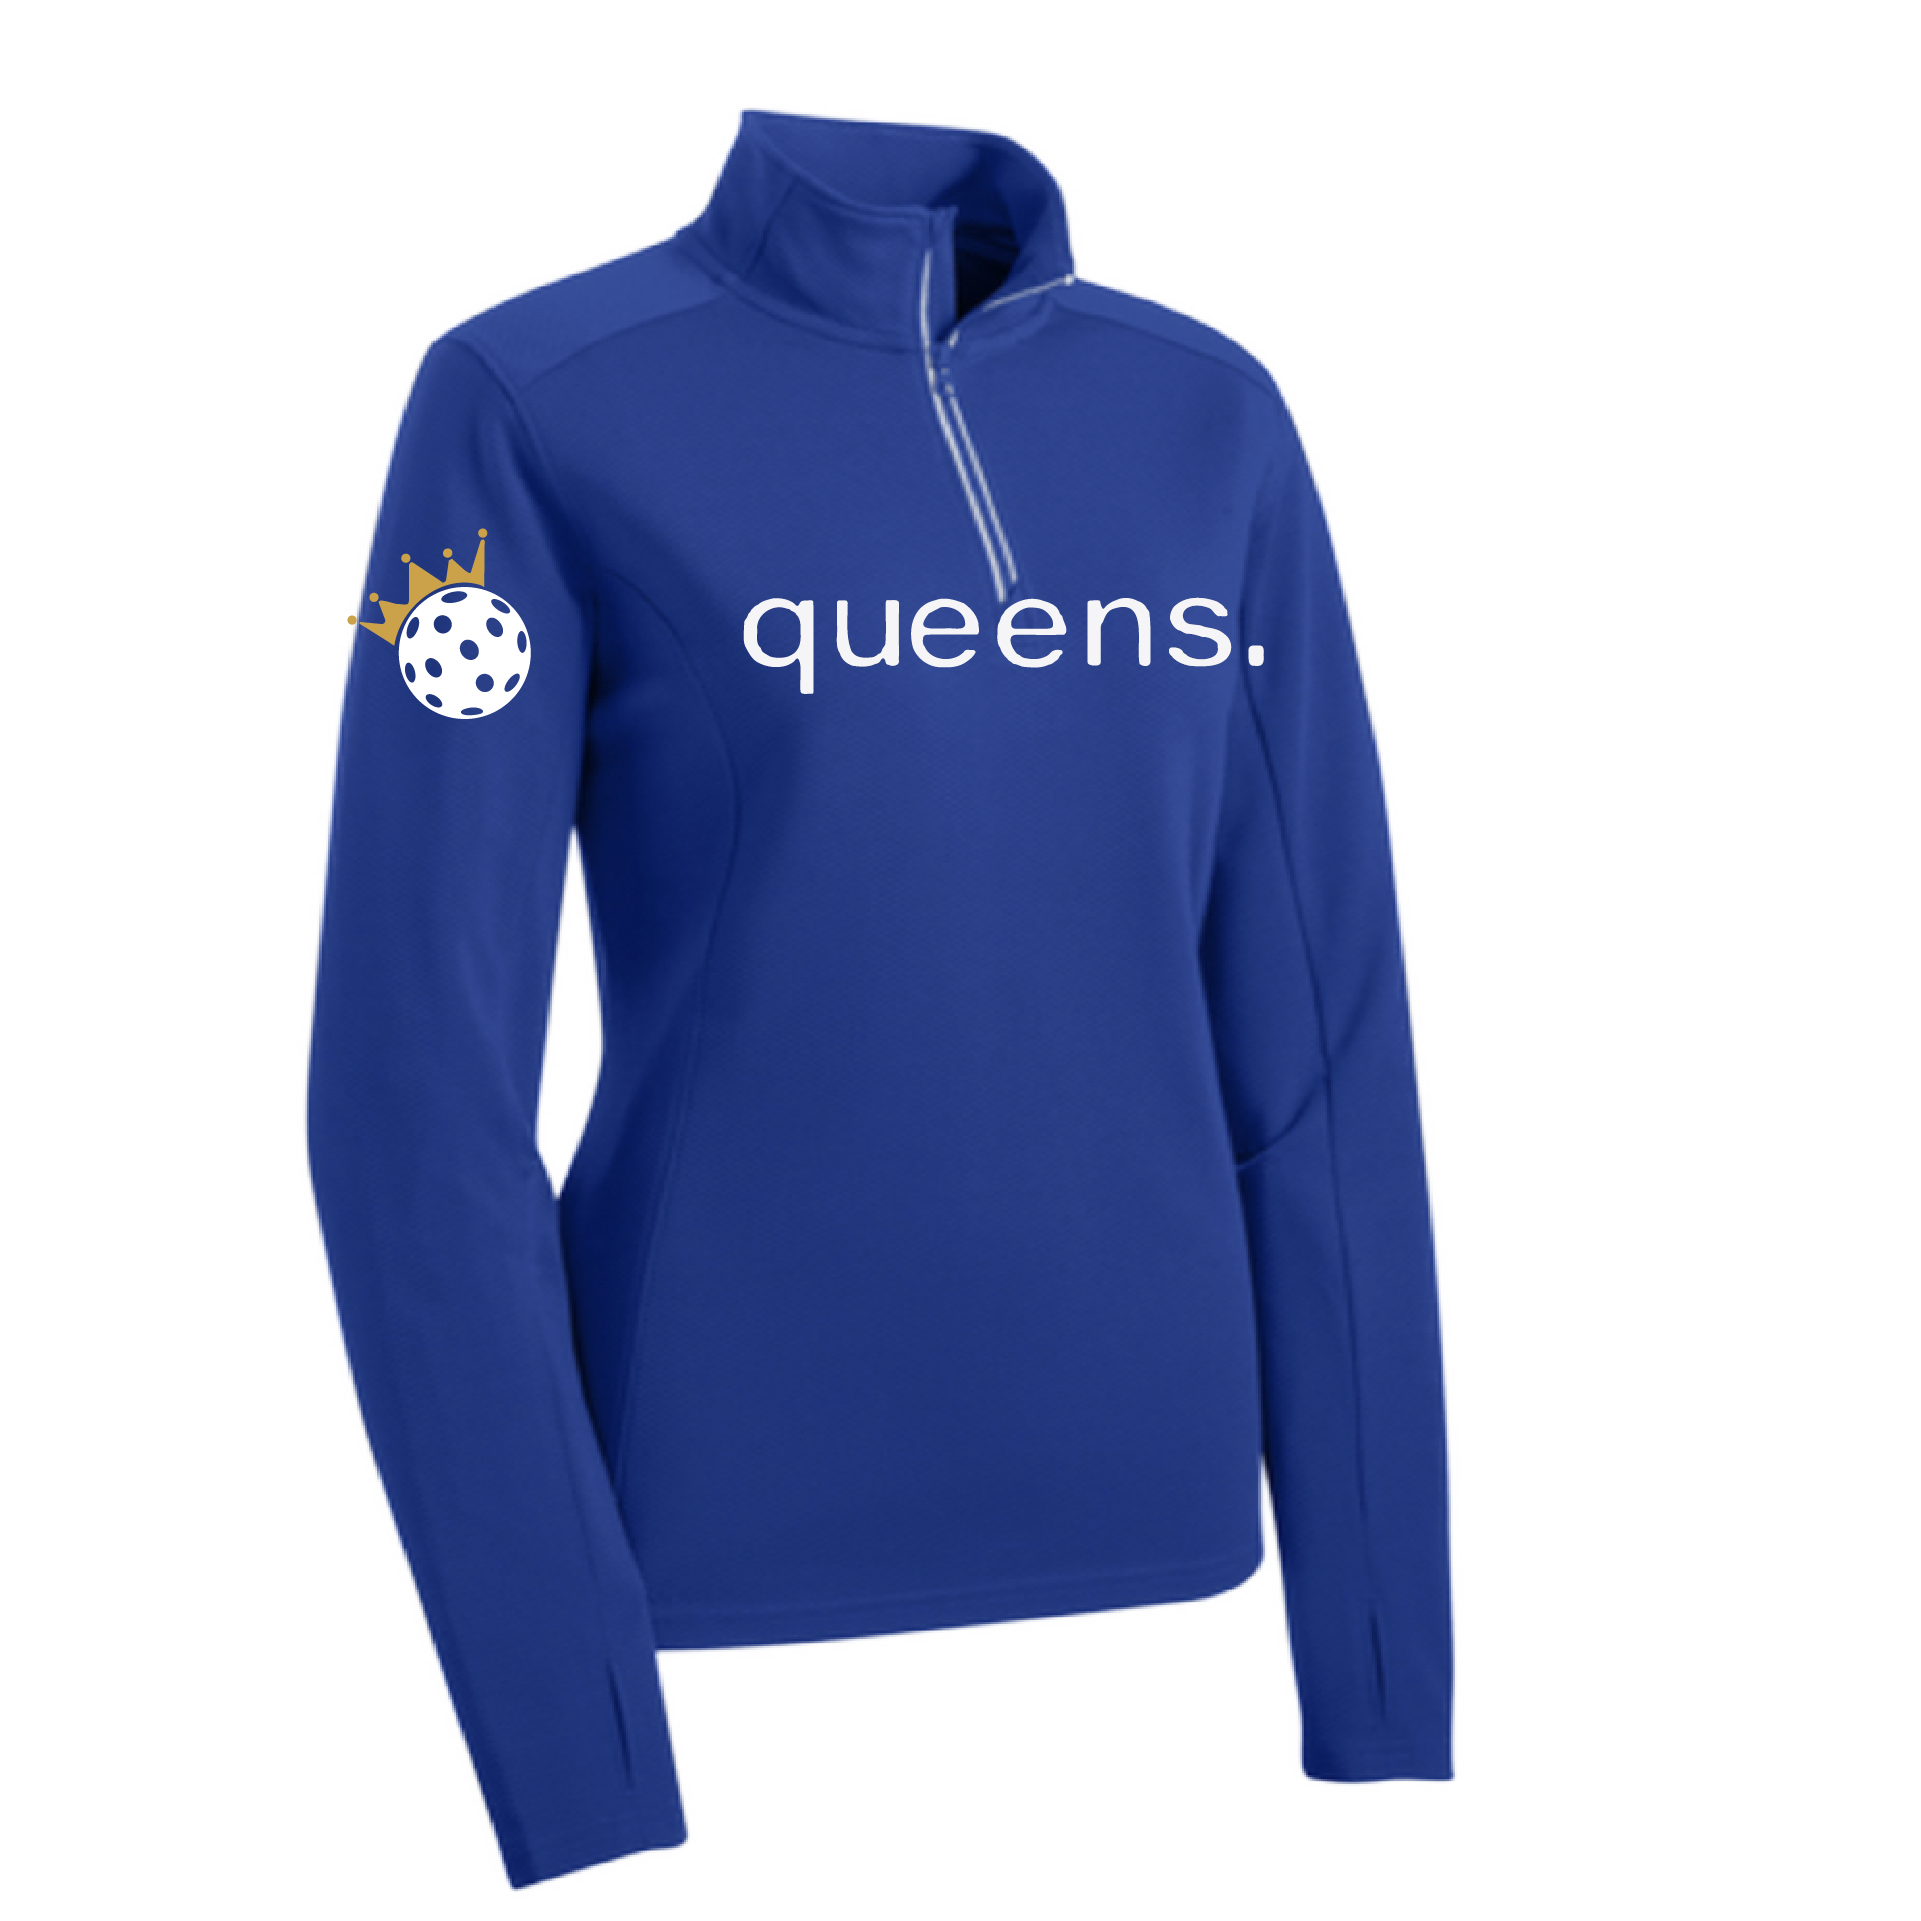 Design: Pickleball Queen and Crown  This Women's 1/4-Zip Pullover features princess seams and a drop tail hem, making it the perfect mix of comfort and style. The material is lightweight and breathable and boasts moisture-wicking properties and a tri-blend softness. The PosiCharge technology ensures vivid, vibrant color that is locked in and stays looking great. With its versatility, it can be worn year-round.